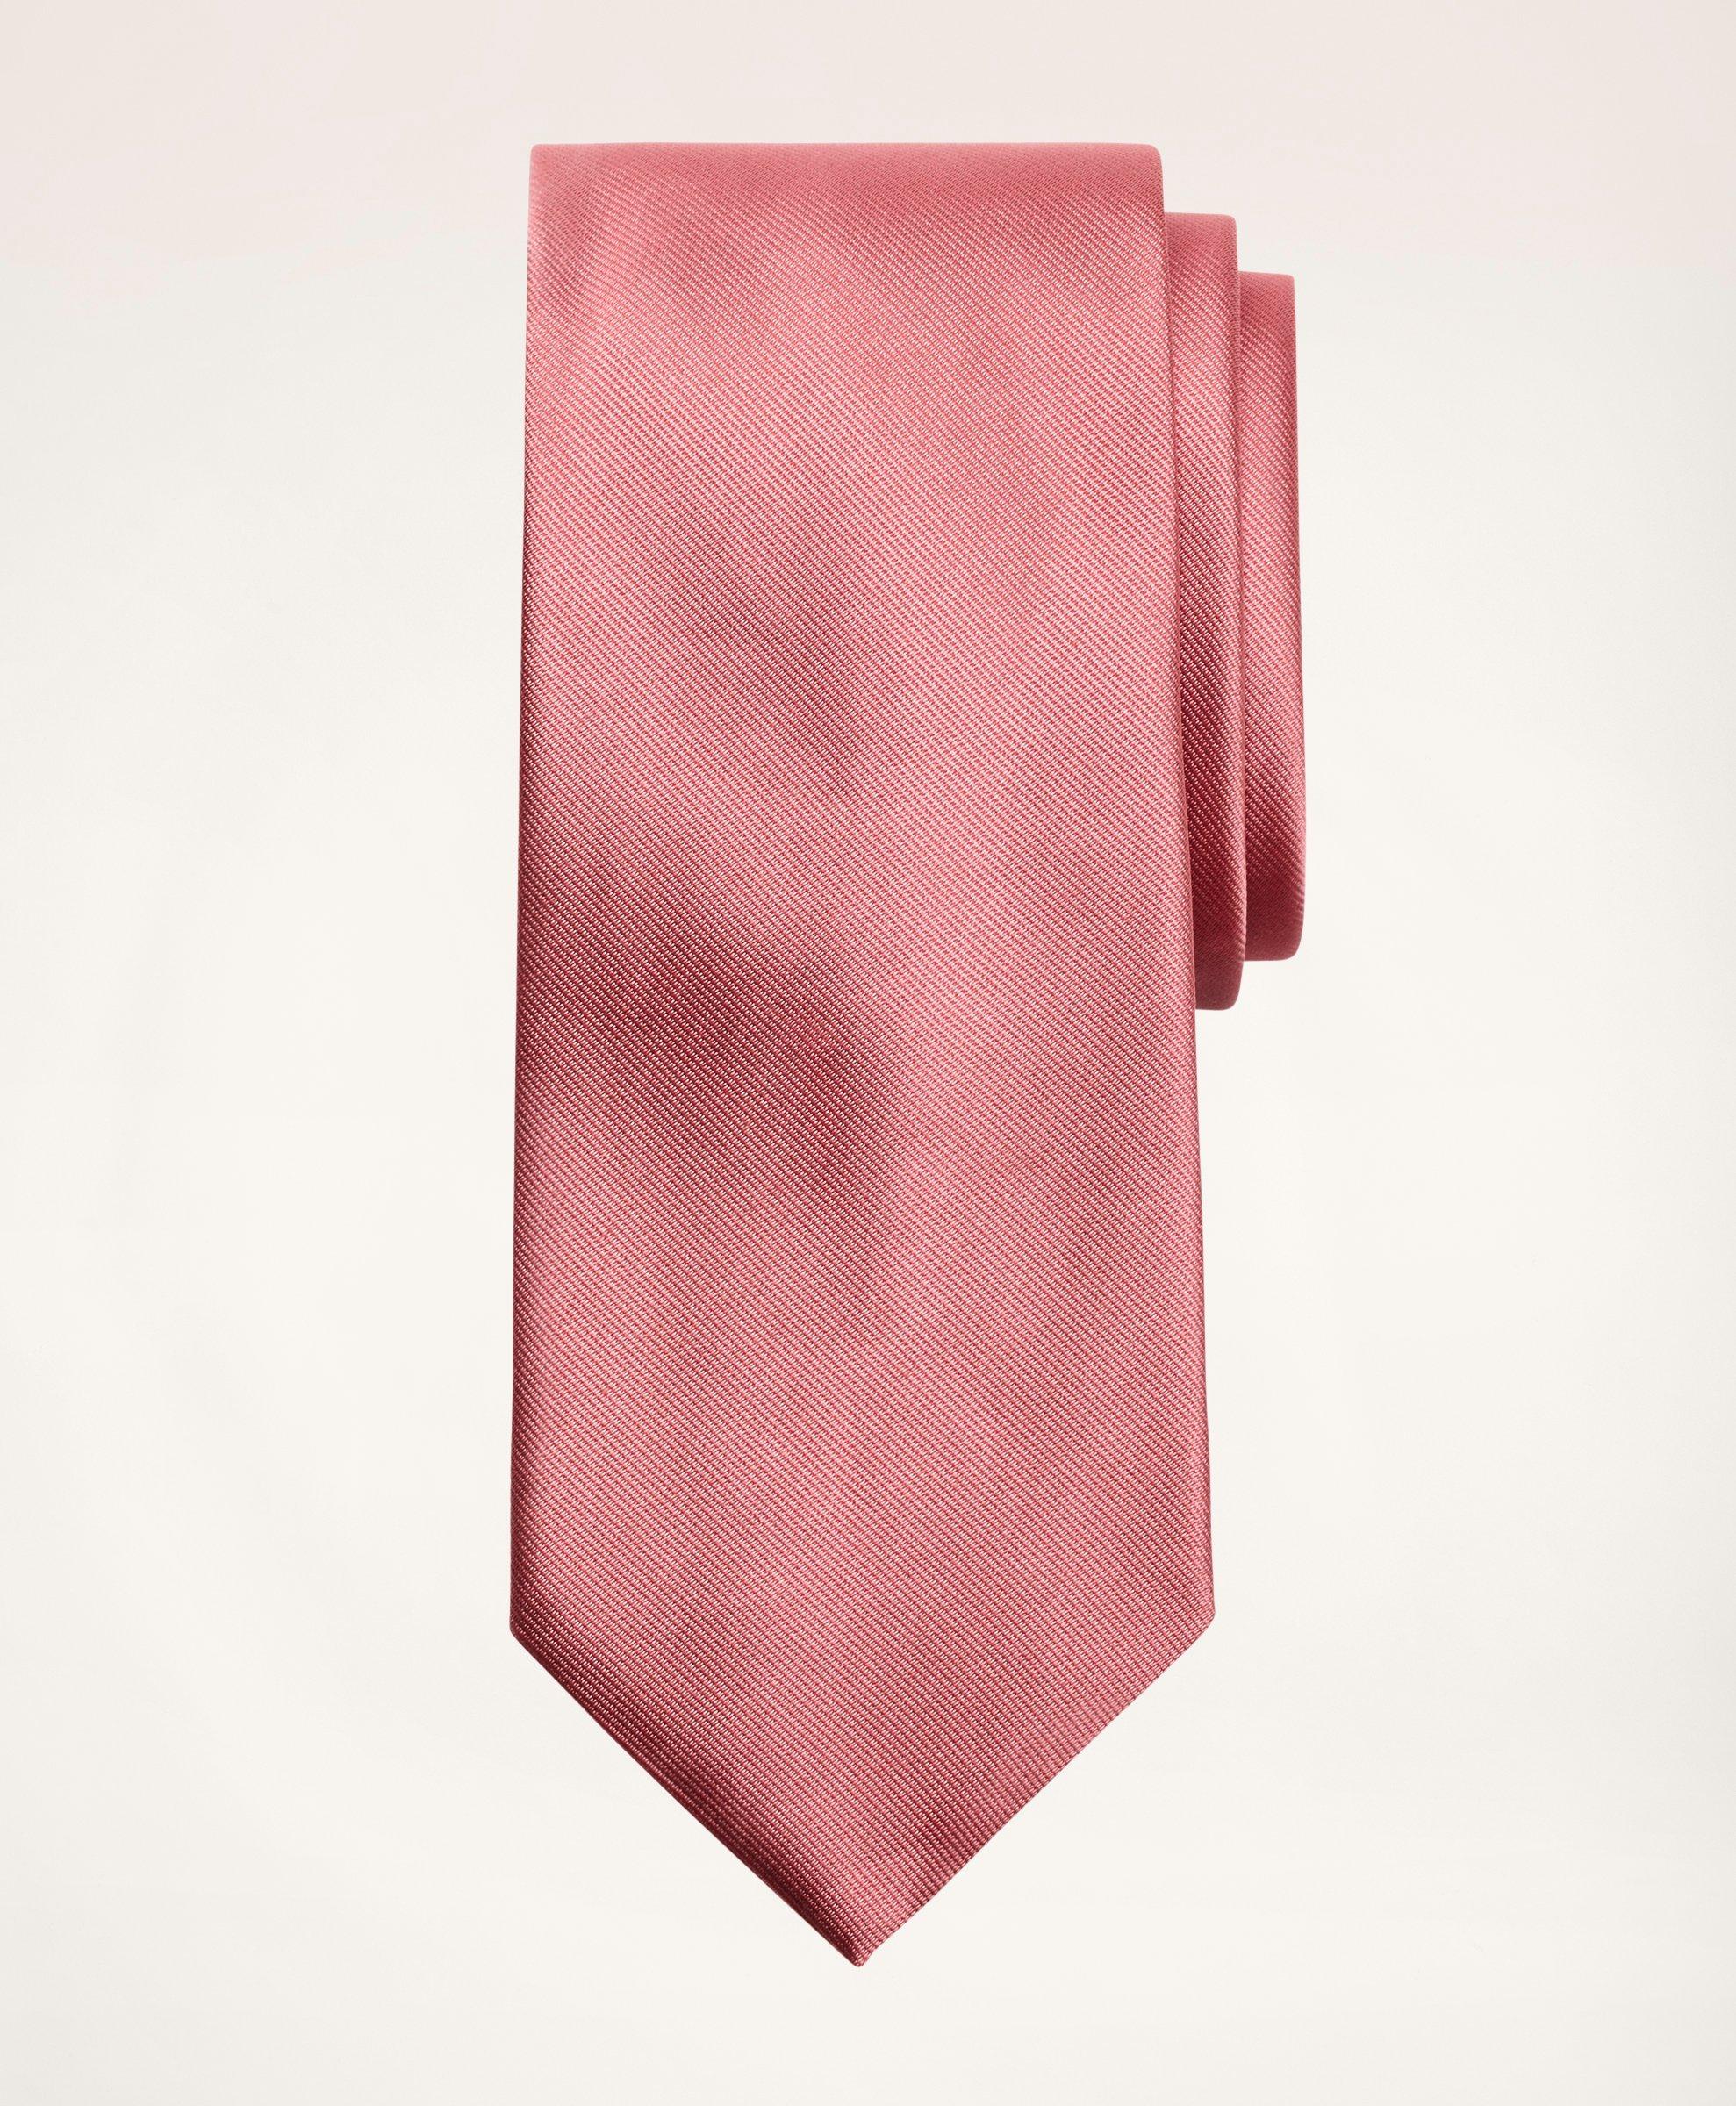 Brooks Brothers Solid Rep Tie | Pink | Size Regular